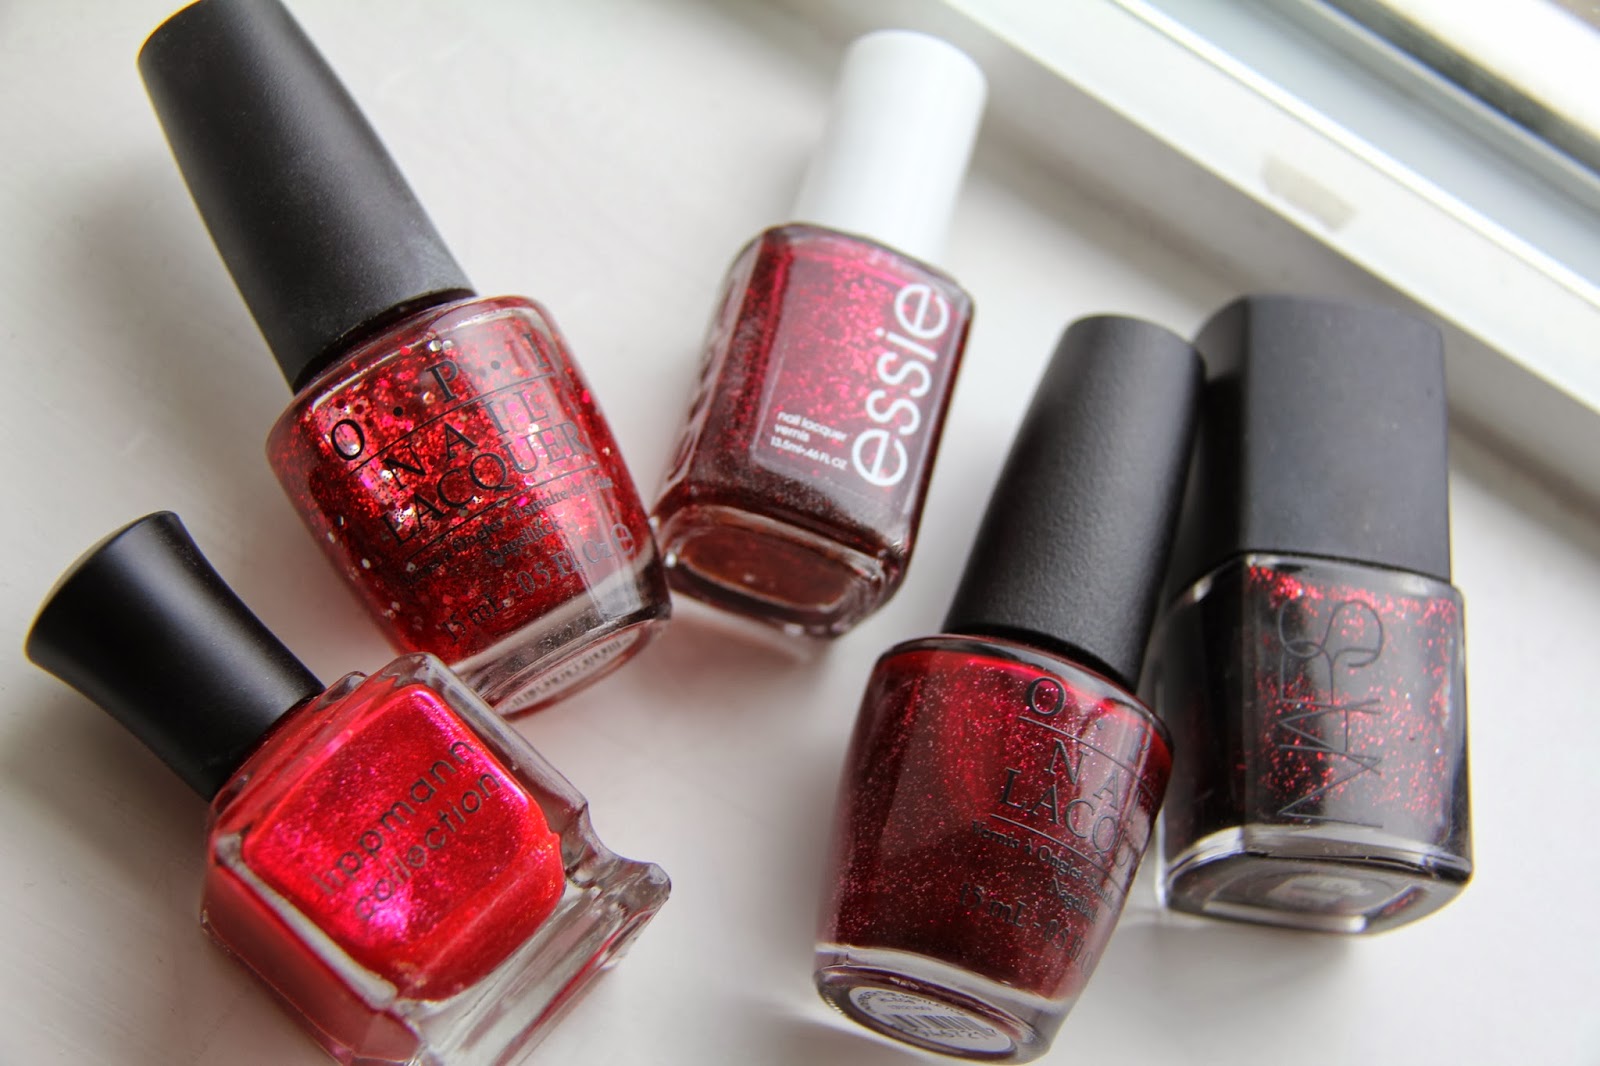 Dsk Steph Holiday Red Glitter Gradient Nails